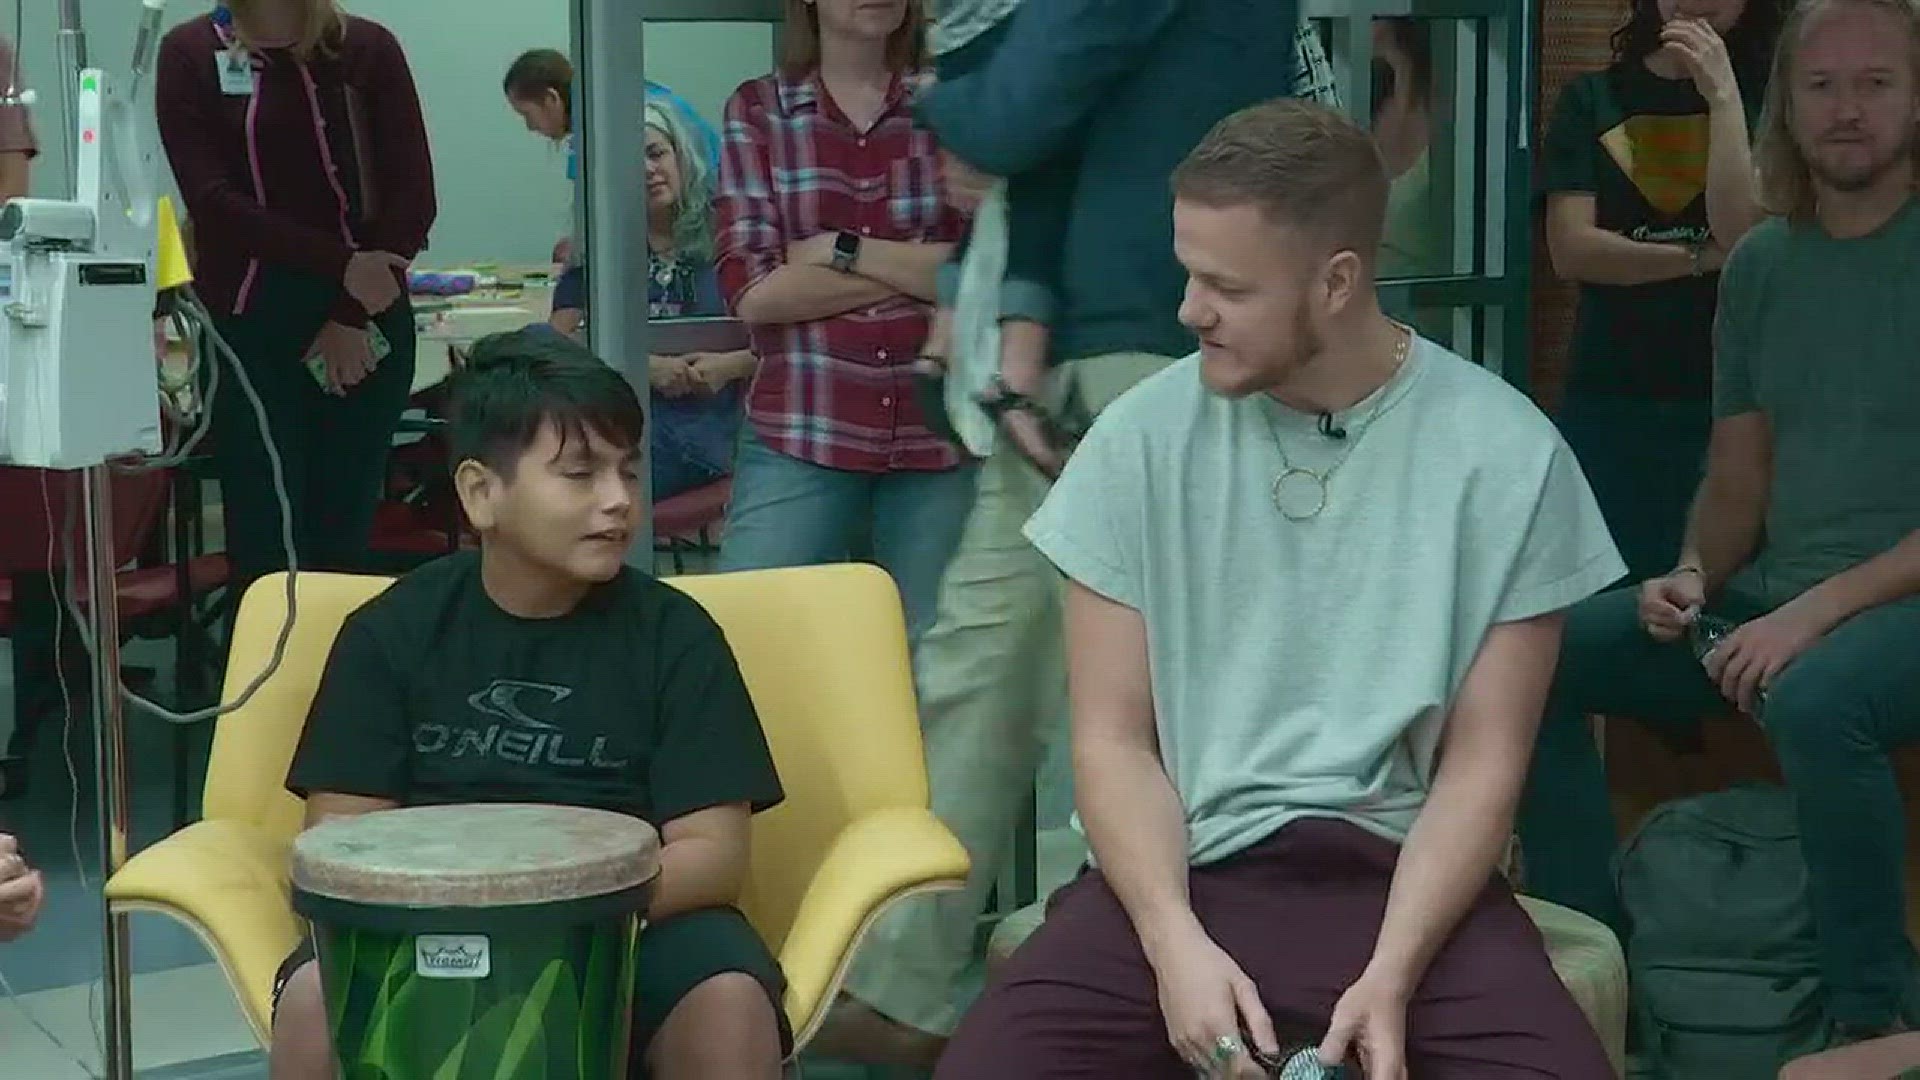 The chart-topping band Imagine Dragons visited Sophie's Place, a music therapy room at Cardon Children's Hospital.